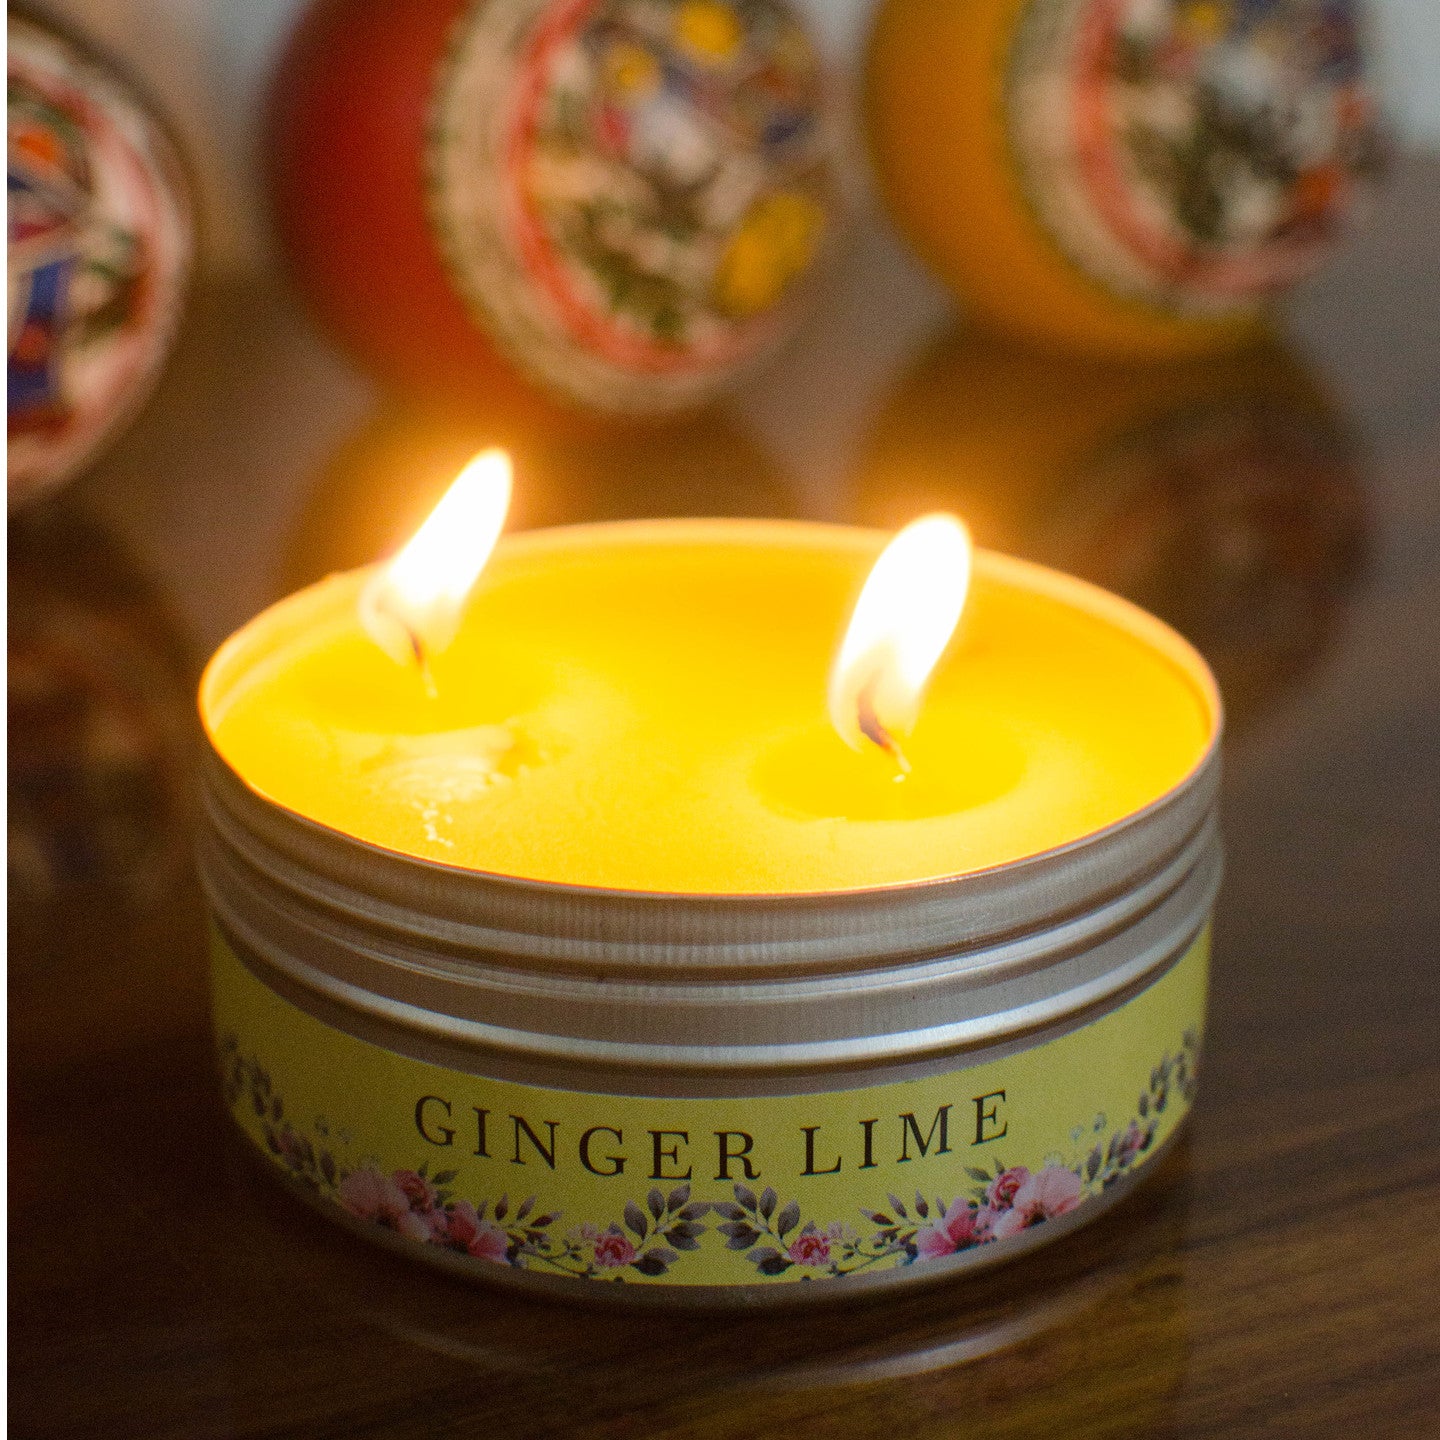 AuraDecor 2 Wick Ginger Lime Tin Candle Burning Time 25 hours - auradecor.co.in